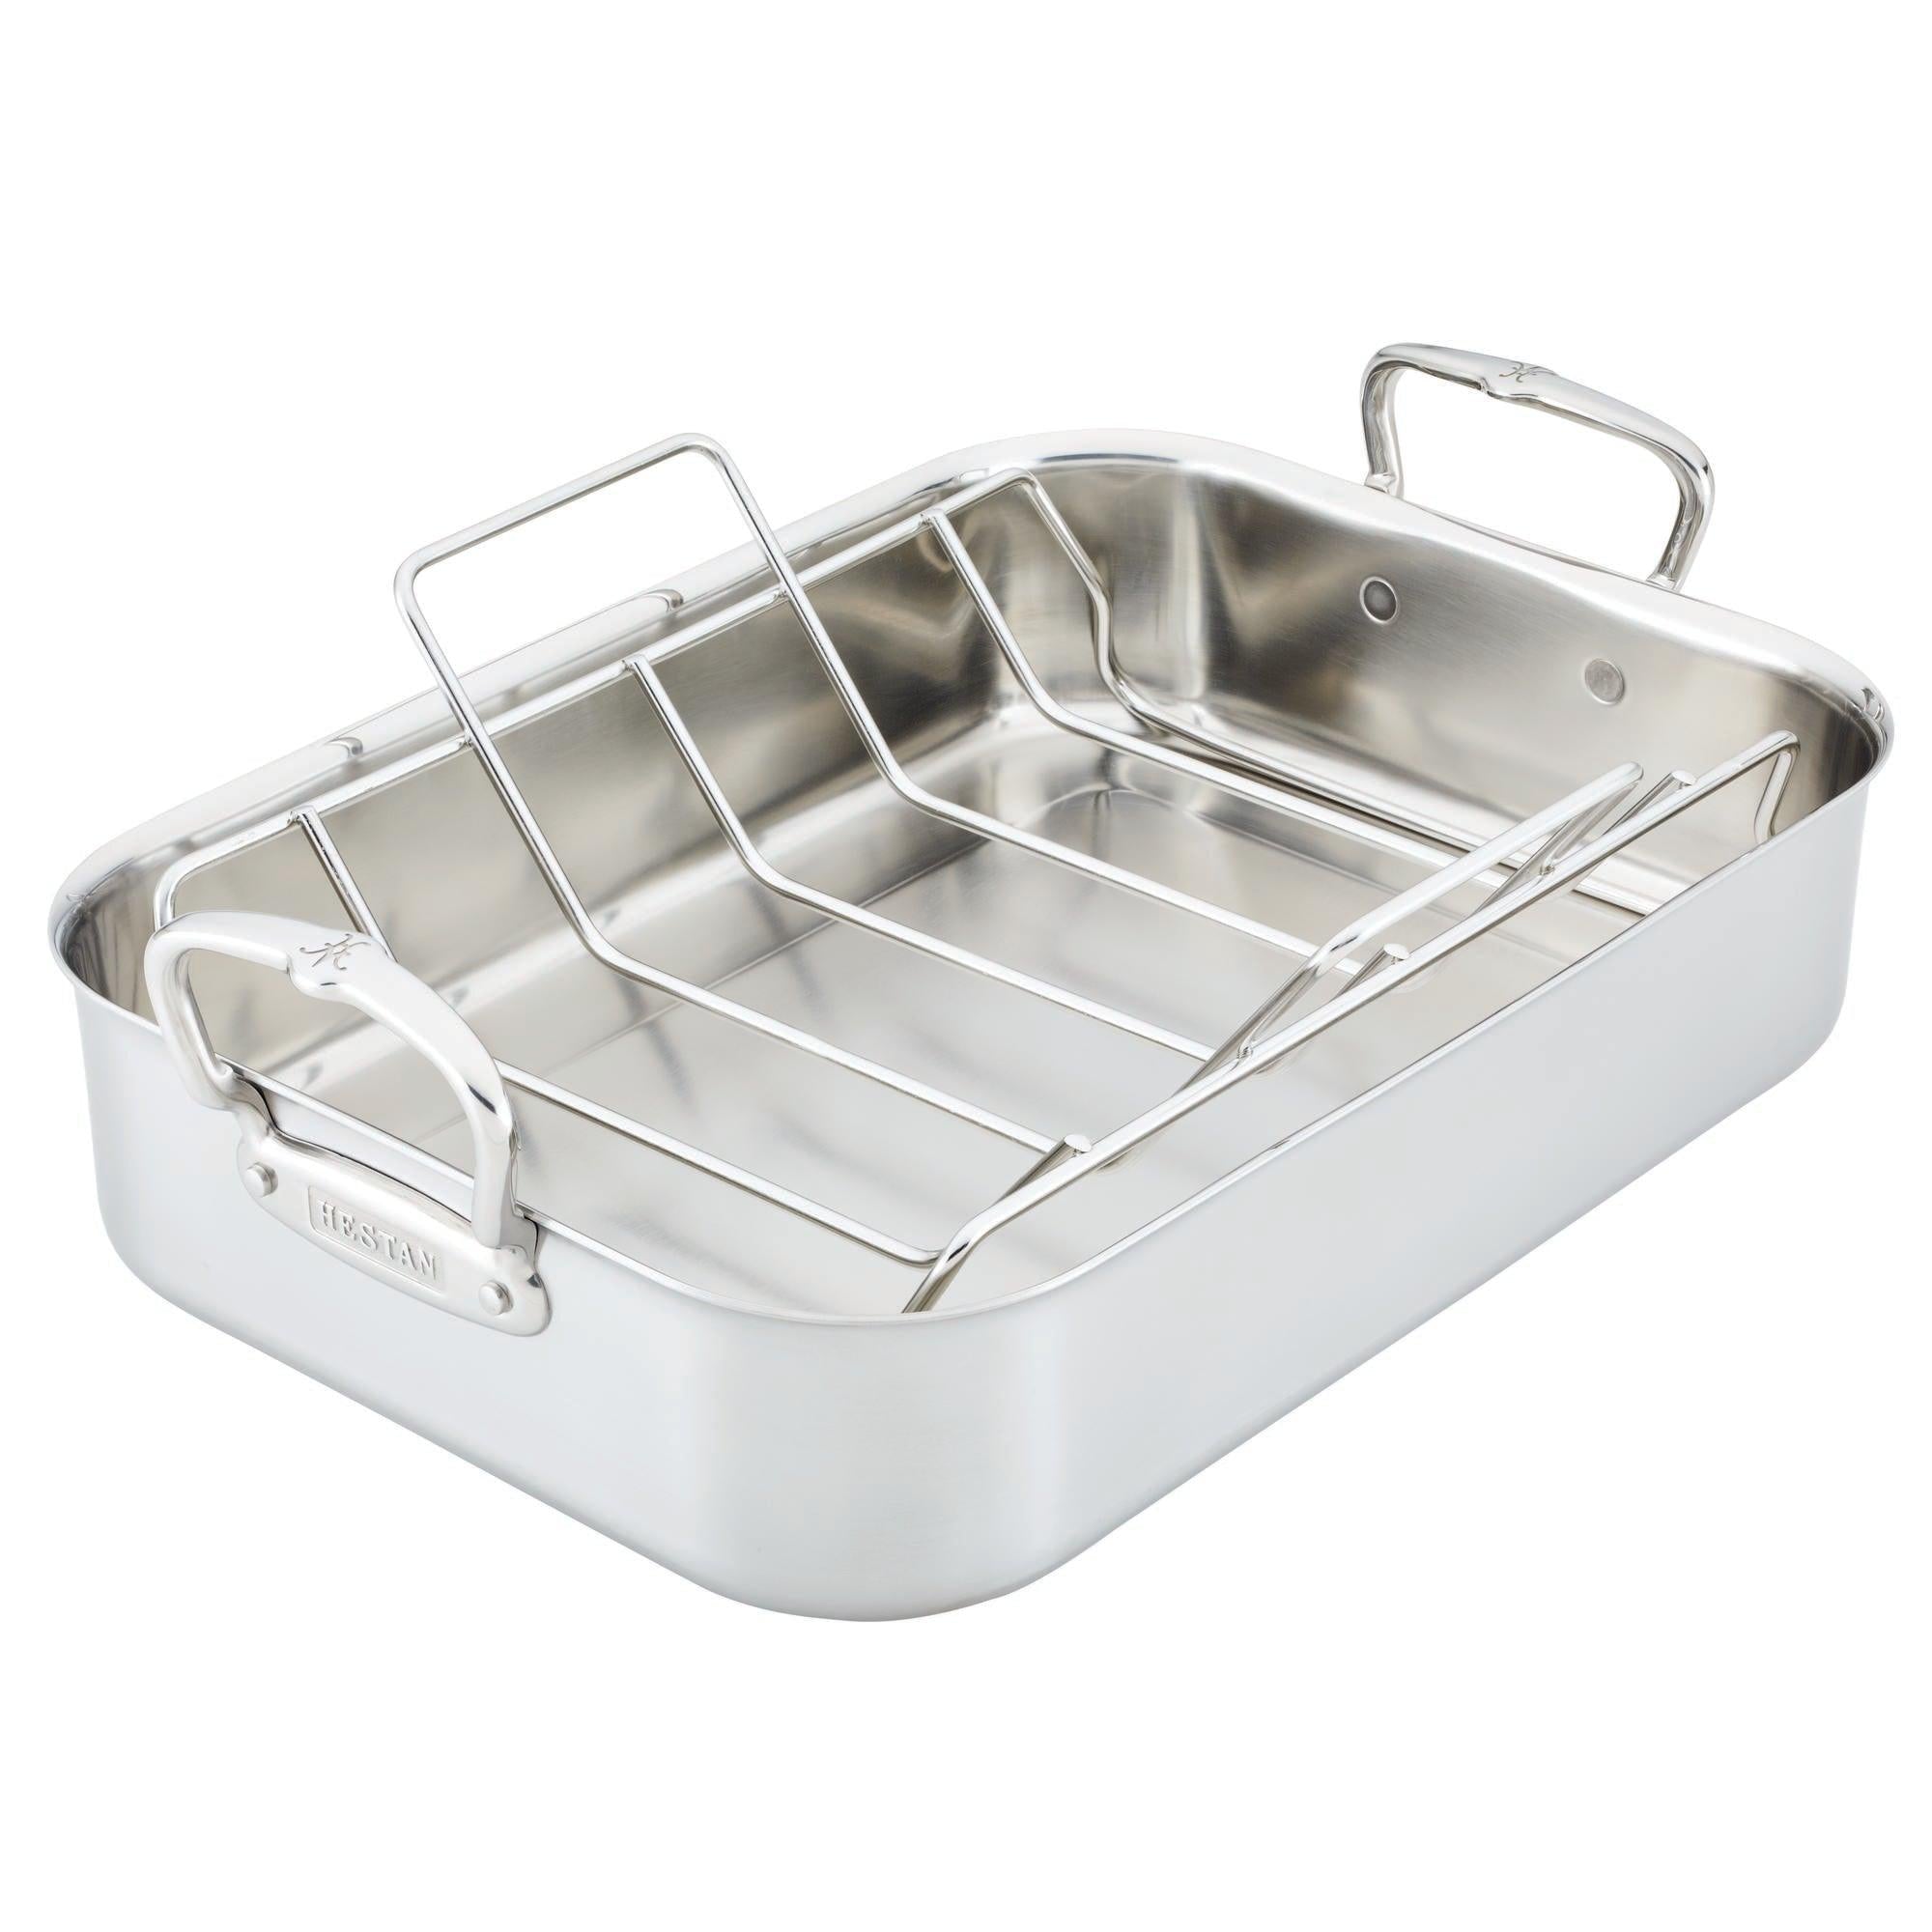 Cooks Aluminum Roasting Pan with Rack, Color: Black - JCPenney